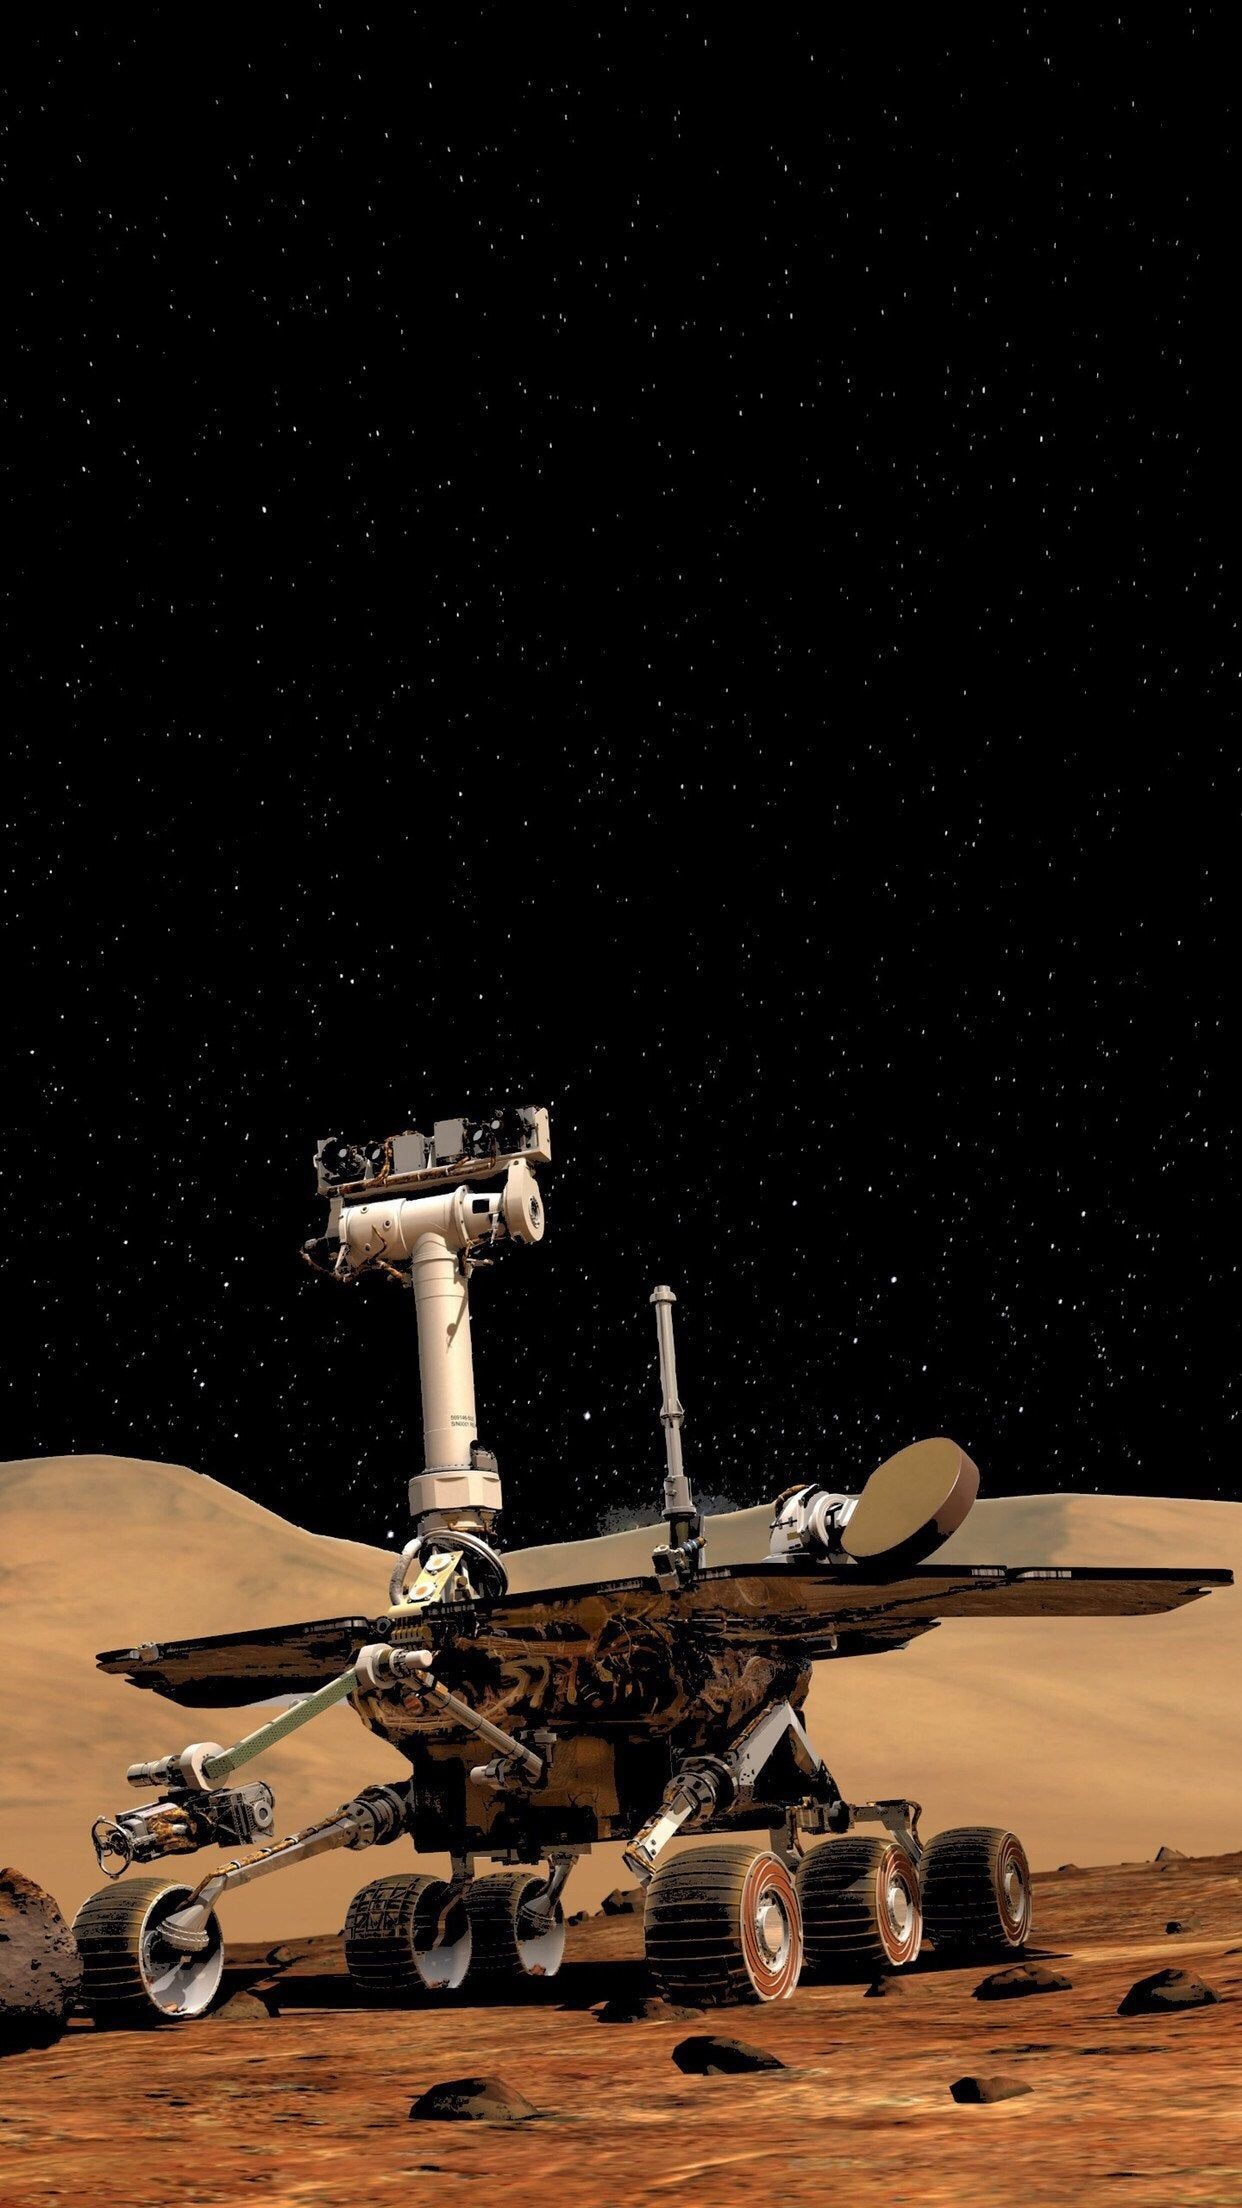 Mars phone wallpapers, Free backgrounds, Space exploration, Mobile screens, 1250x2210 HD Phone